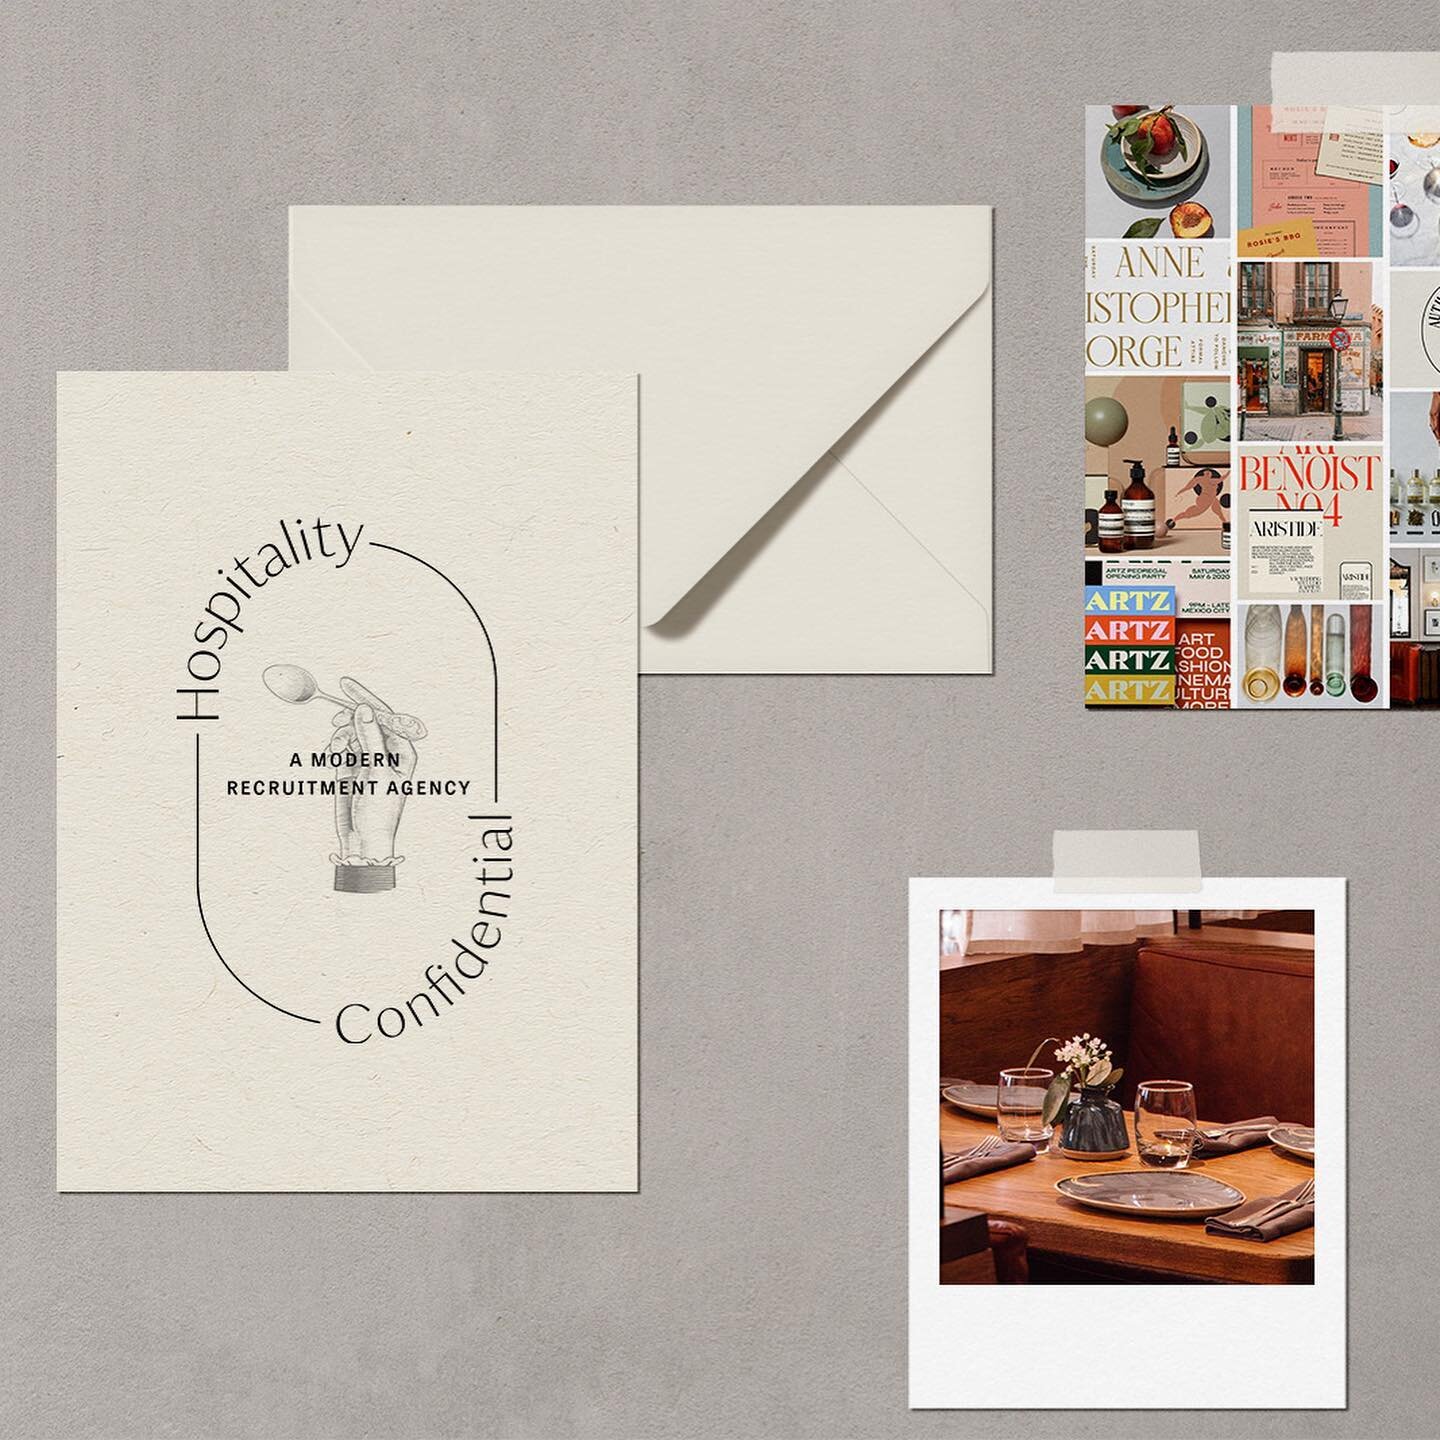 Swipe to see the moodboard that inspired the branding and website for @hospitality.confidential

.
.
.
.
.
#webdesign #squarespacewebdesign #squarespace #squarestylist #standoutsquarespace #customwebdesign #webdesigner #squarespacewebdesigner #brandi